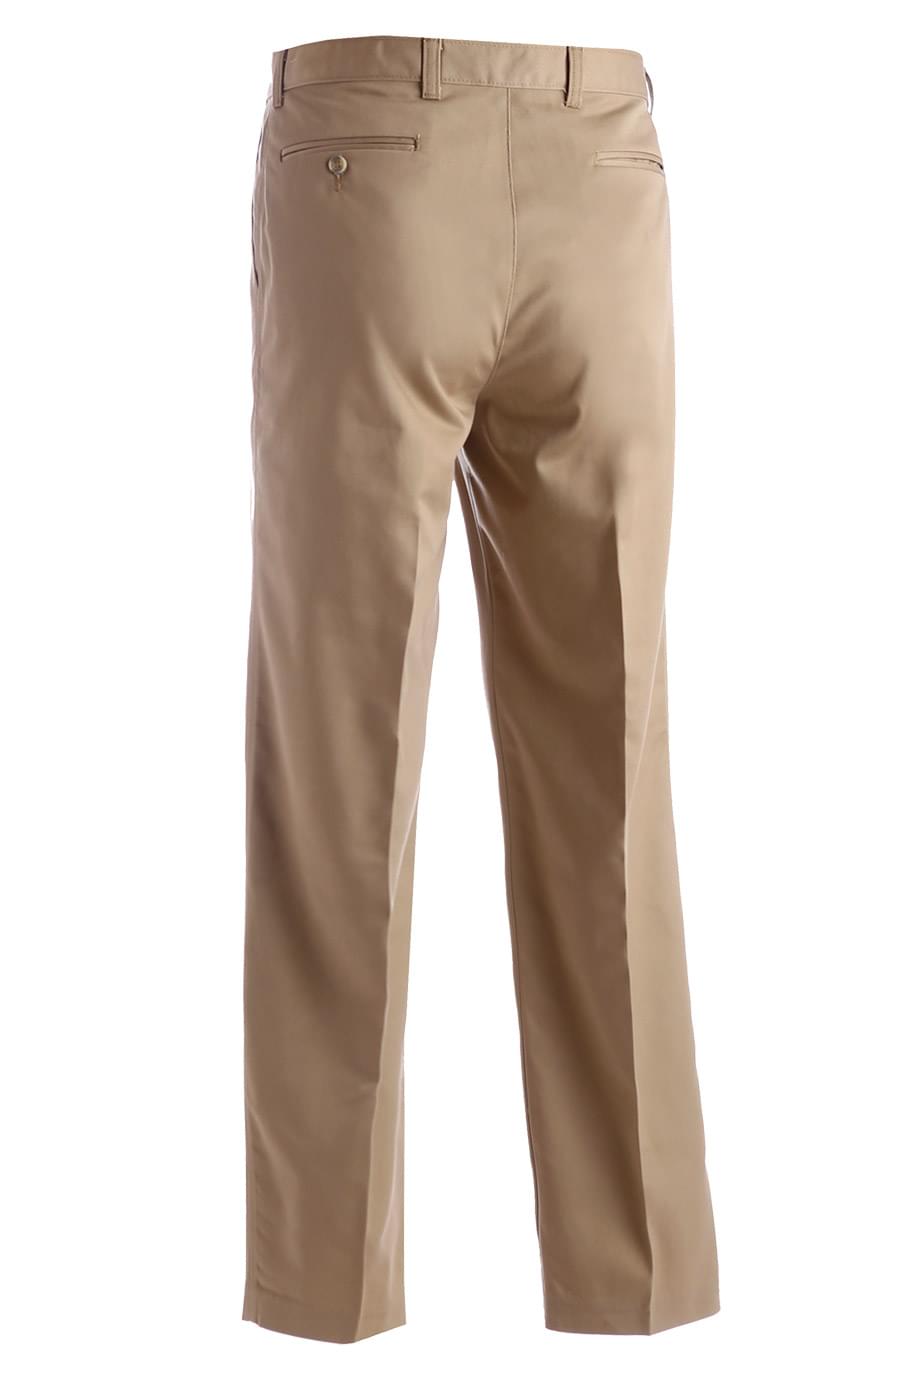 BLENDED CHINO PLEATED FRONT PANT